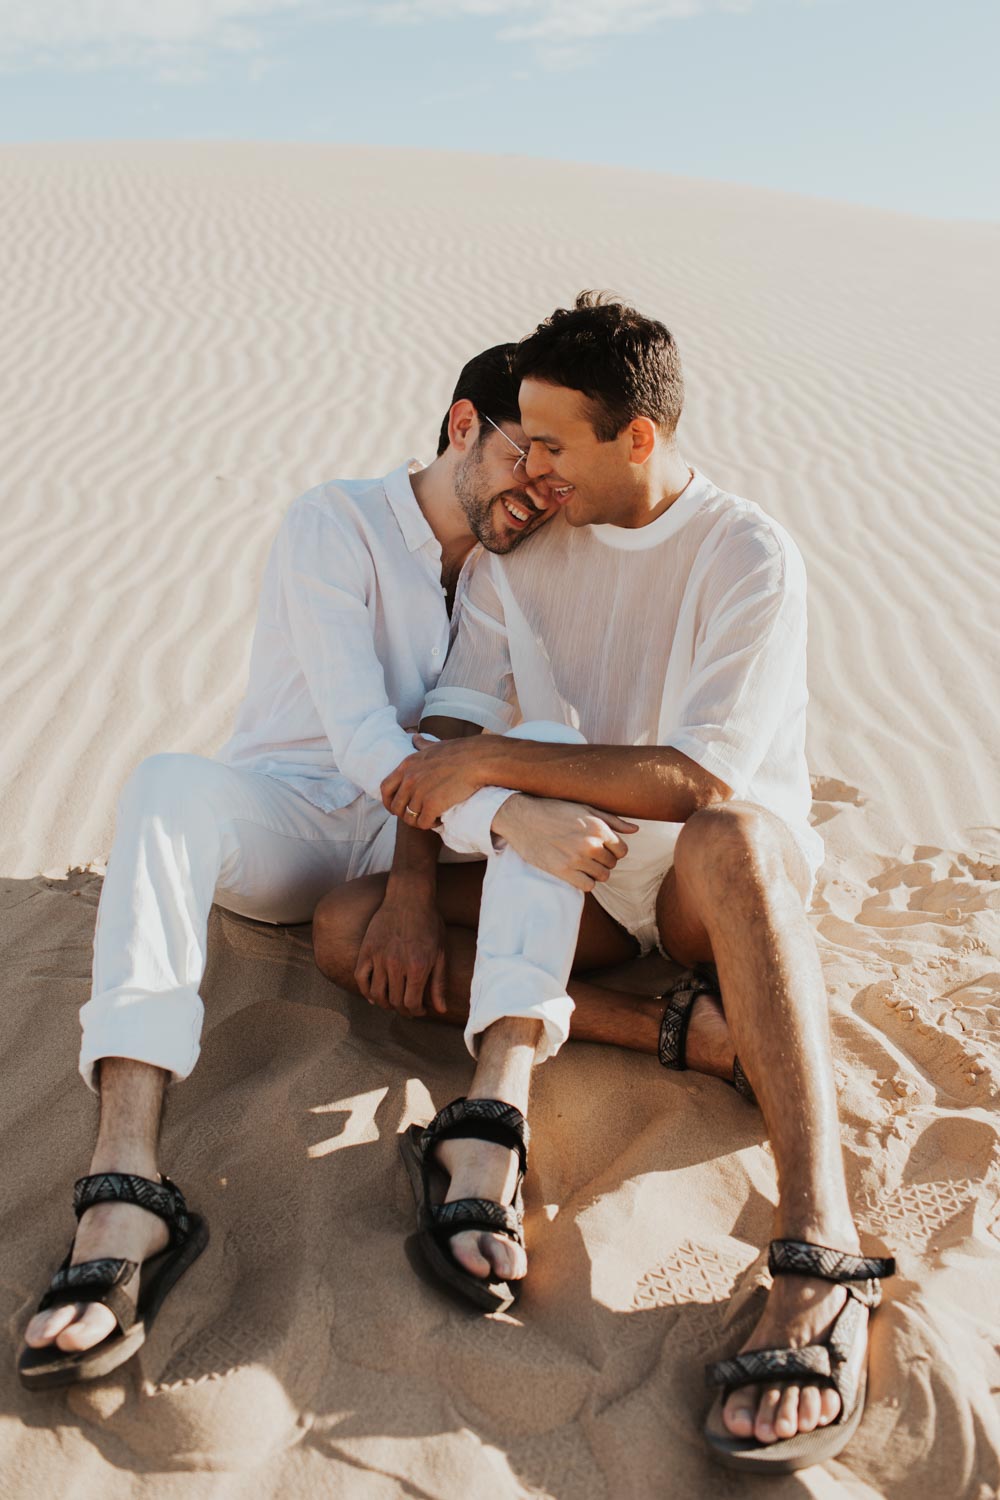 Monochrome winter engagement session at California sand dunes | Photo by Liz Erban LGBTQ weddings and engagements Equally Wed